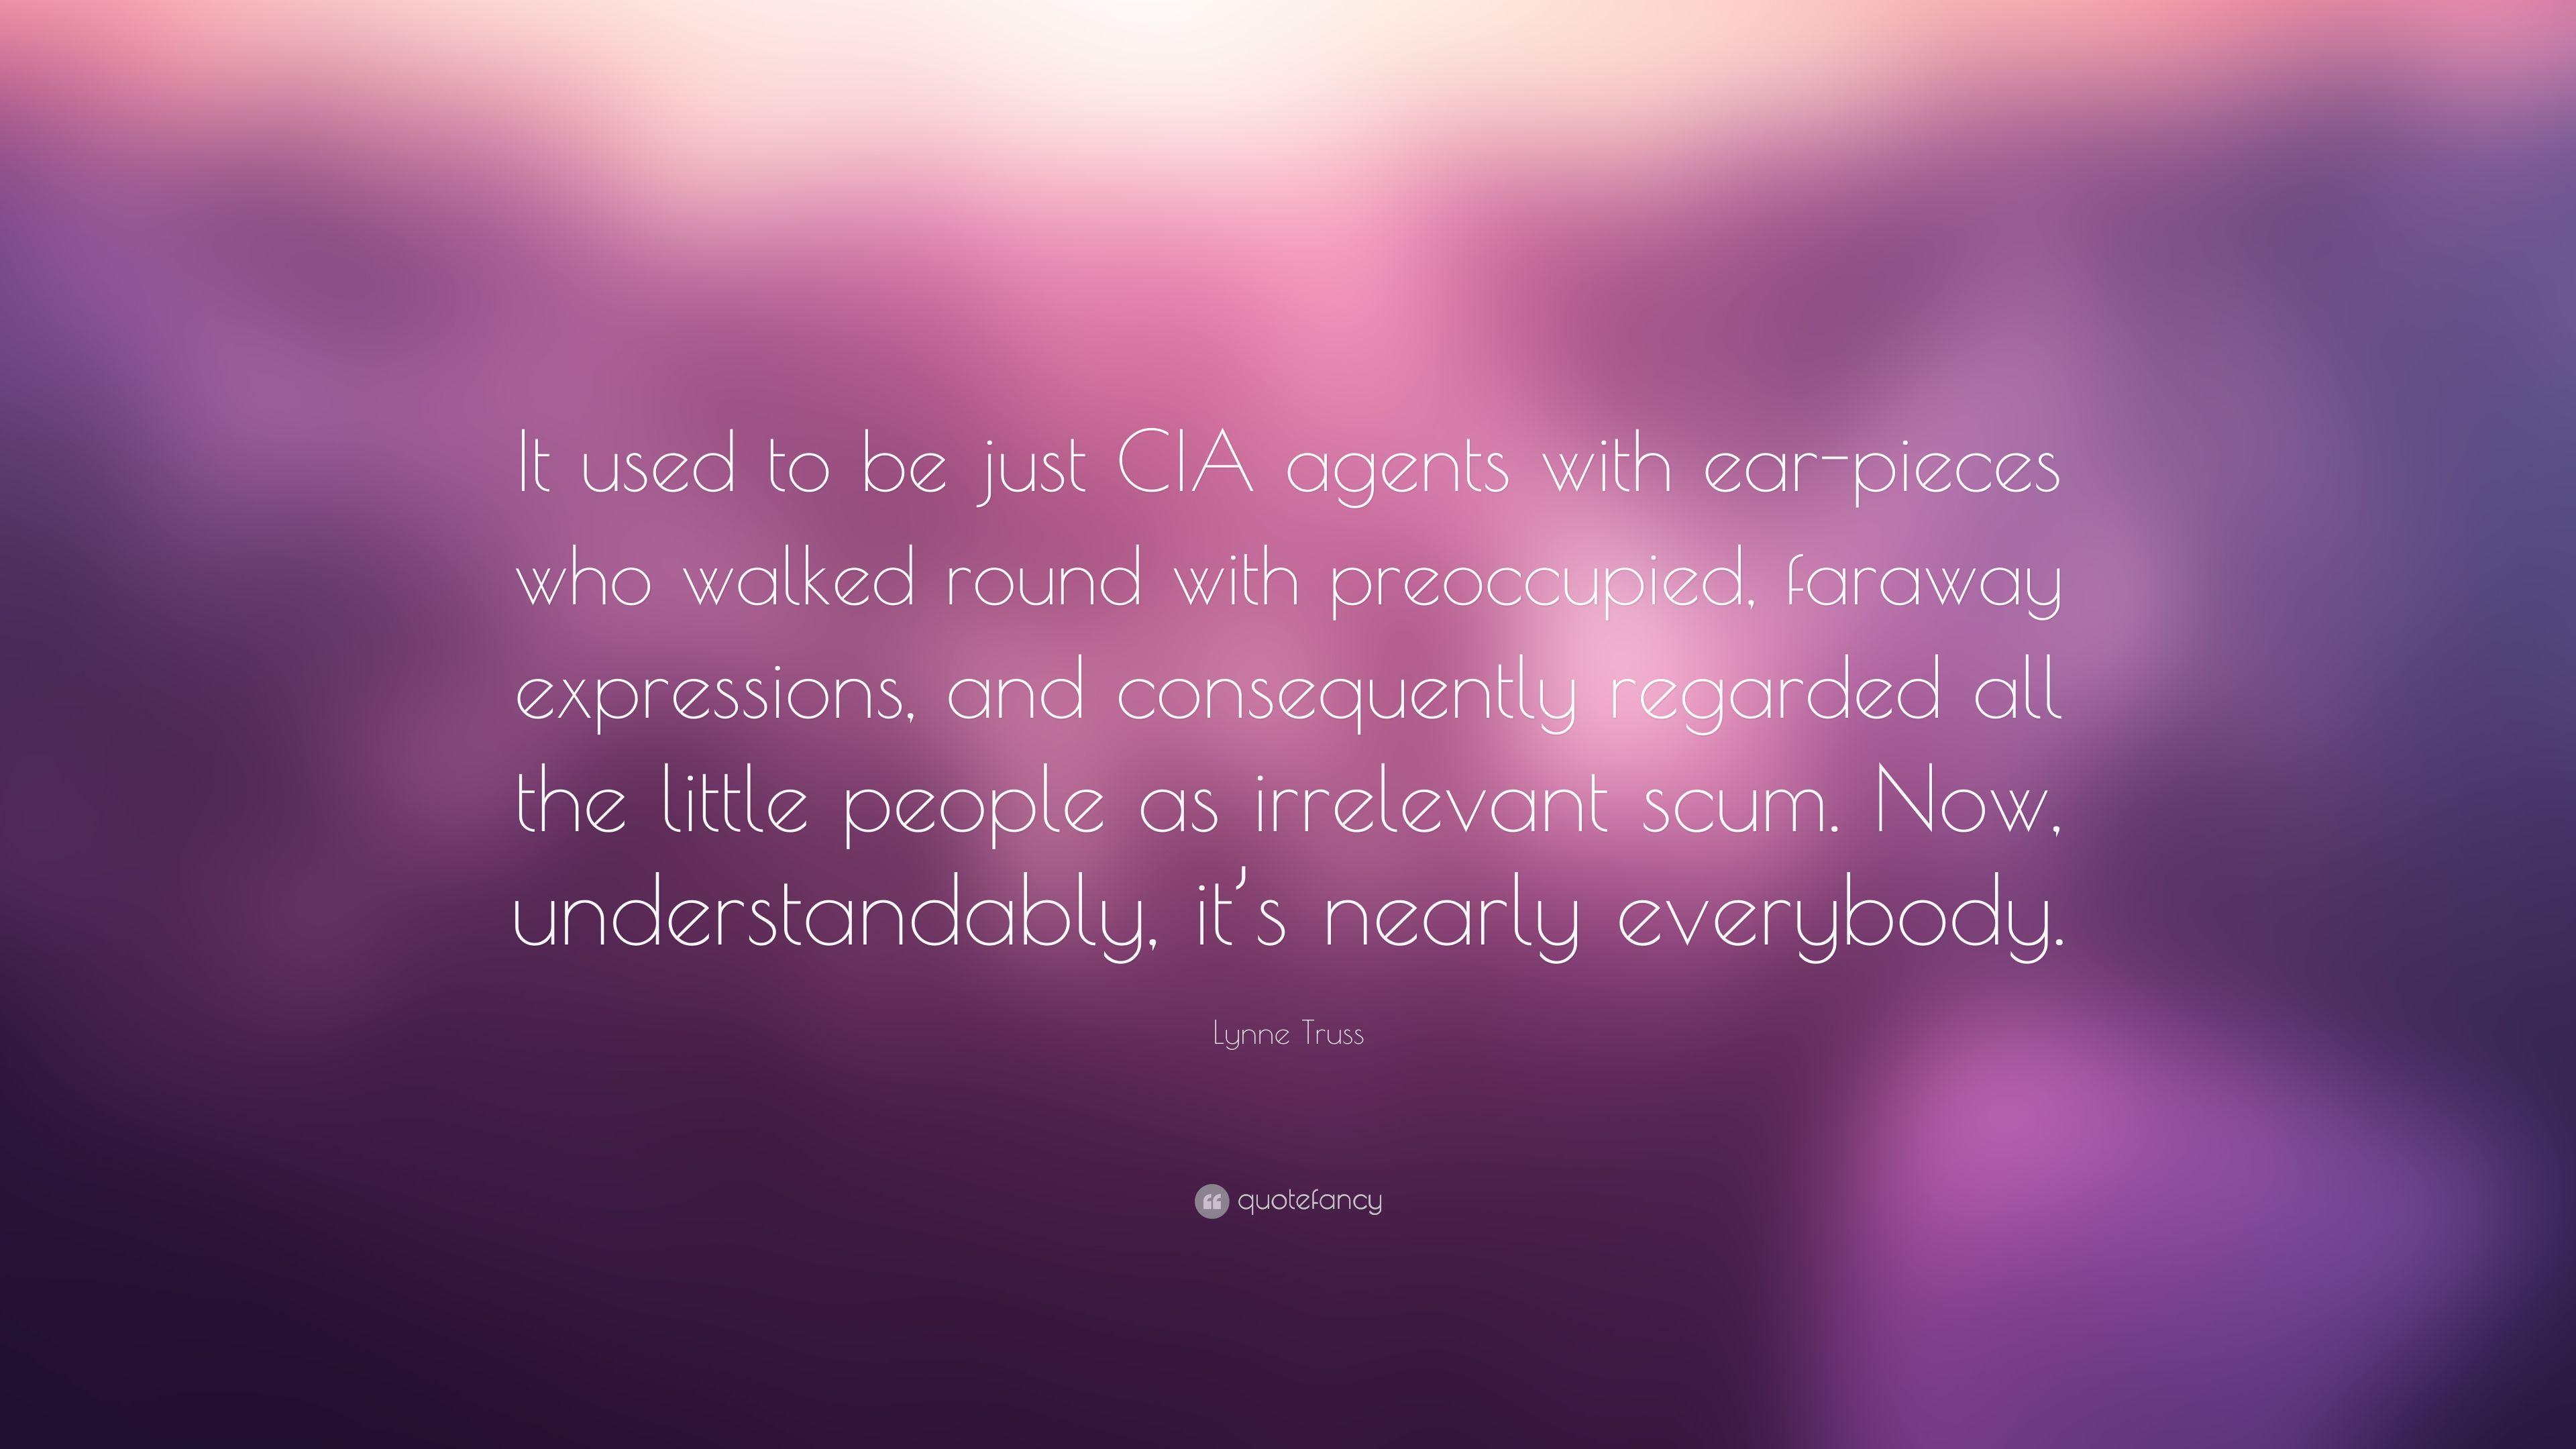 Lynne Truss Quote: “It used to be just CIA agents with ear